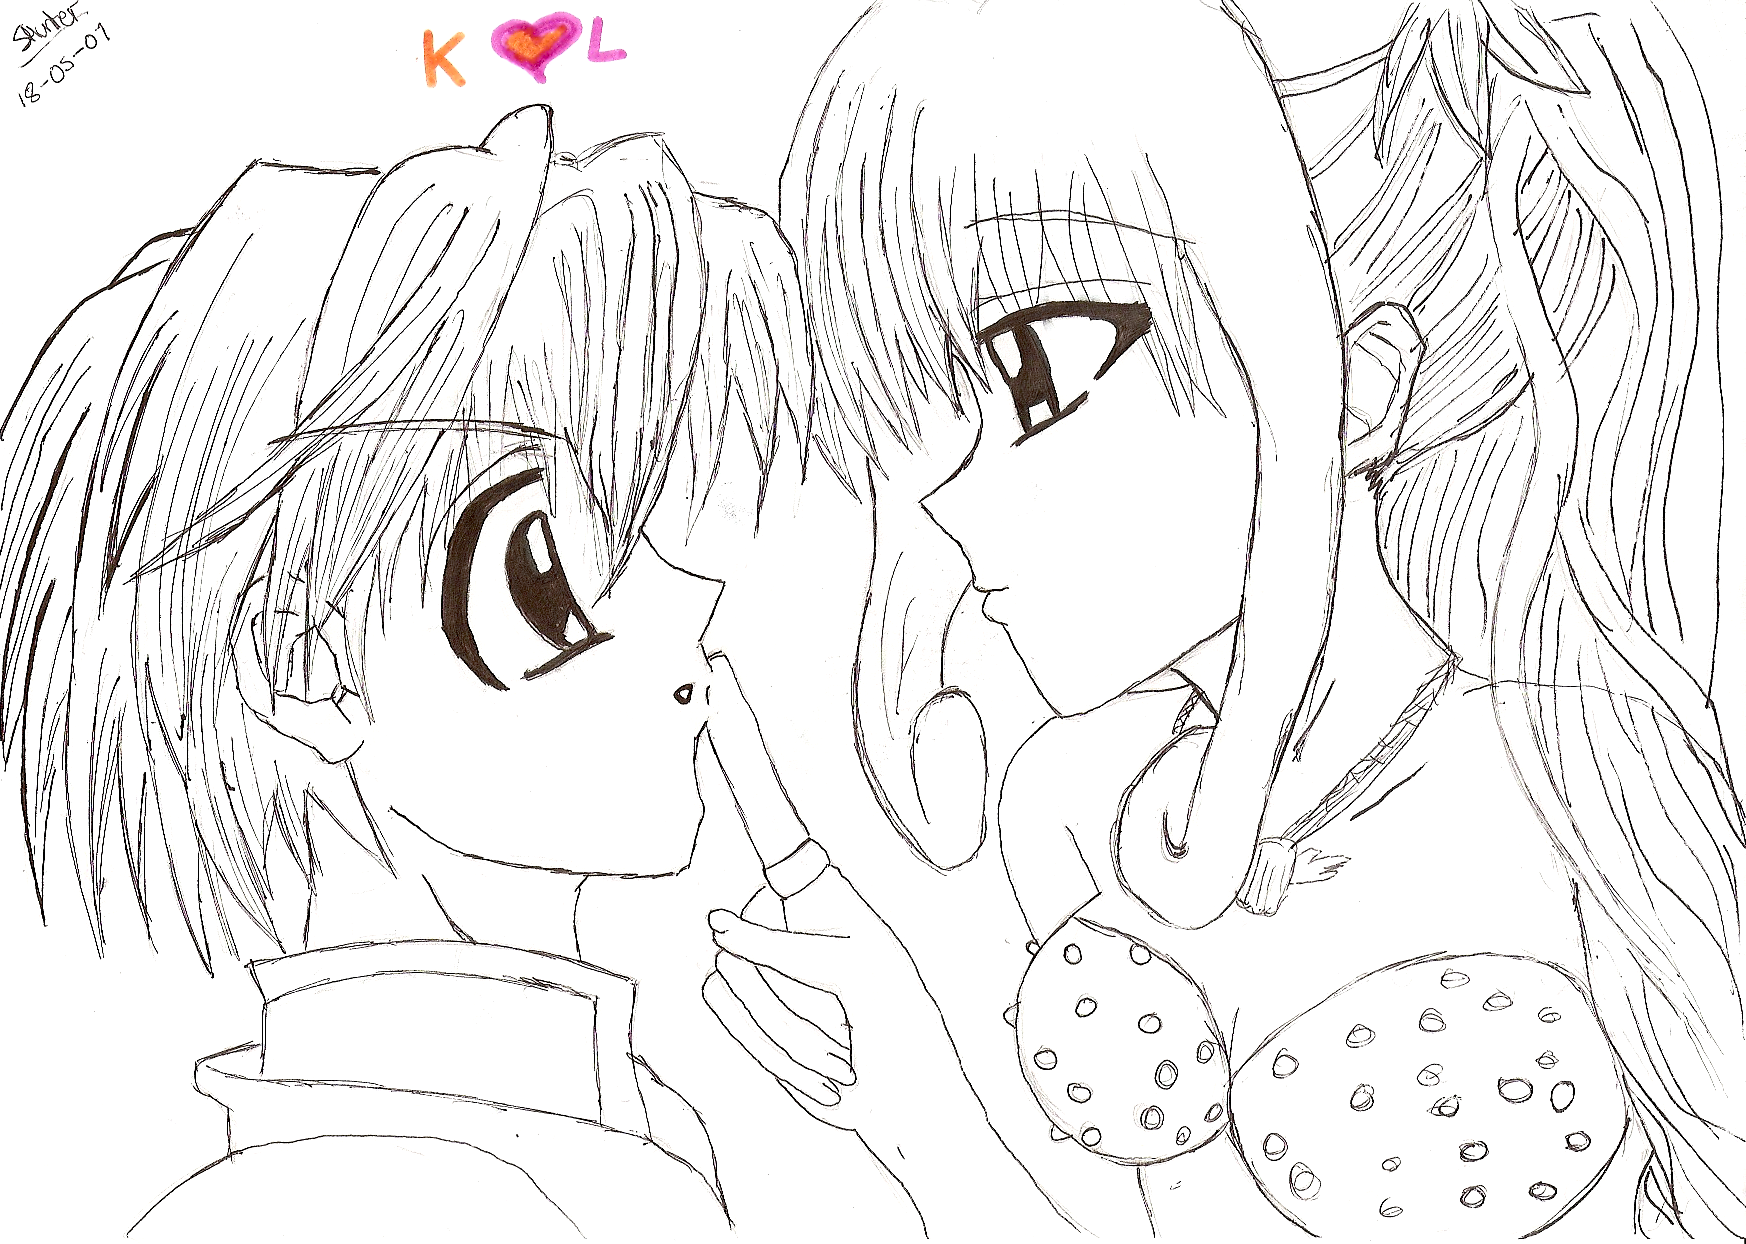 Yet Another Lucia X Kaito Picture &lt;3 by sonicparade